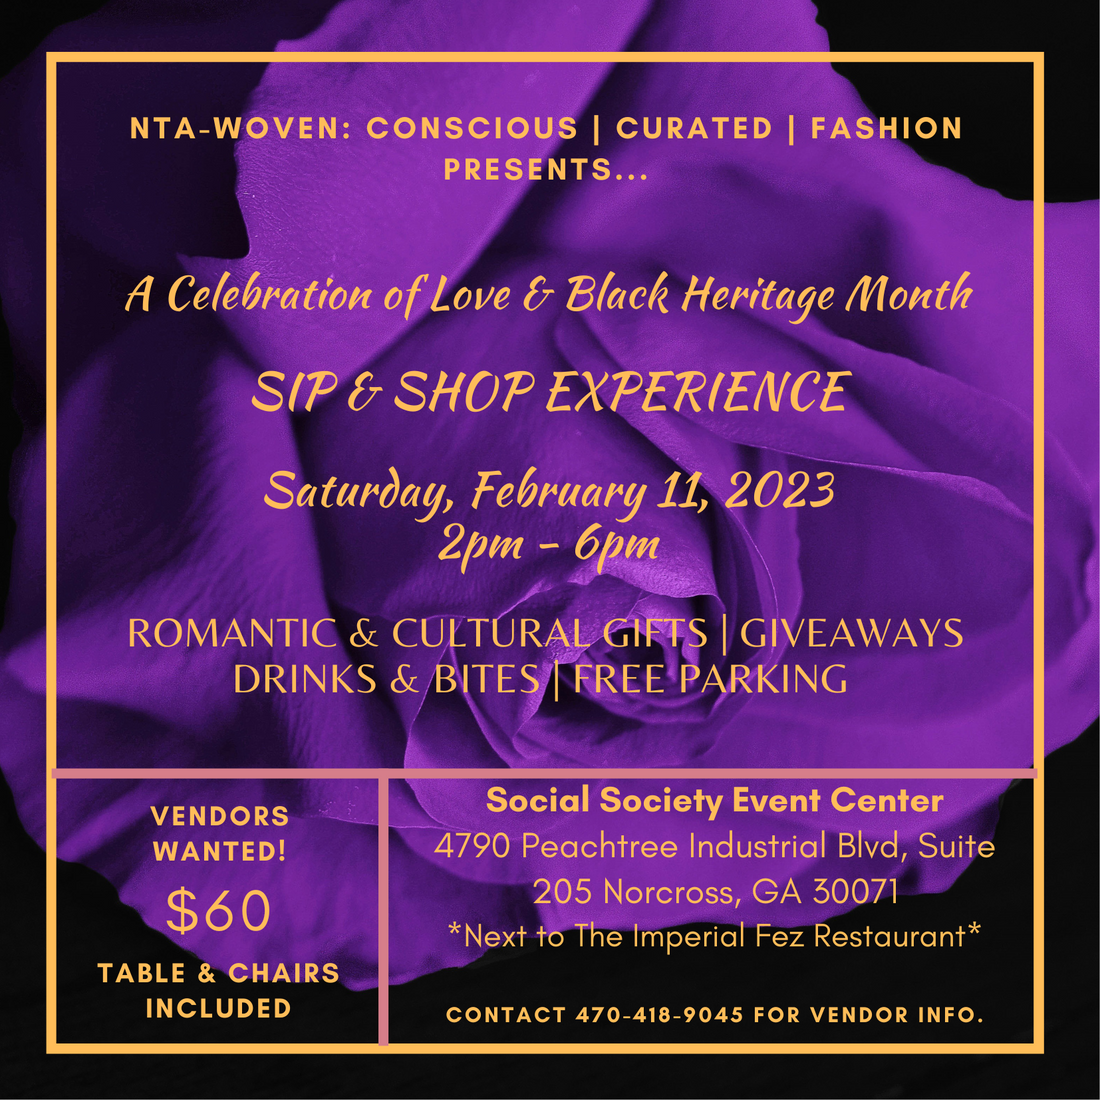 Nta-woven Presents: A Celebration of Love & Black Heritage Month Sip & Shop Experience